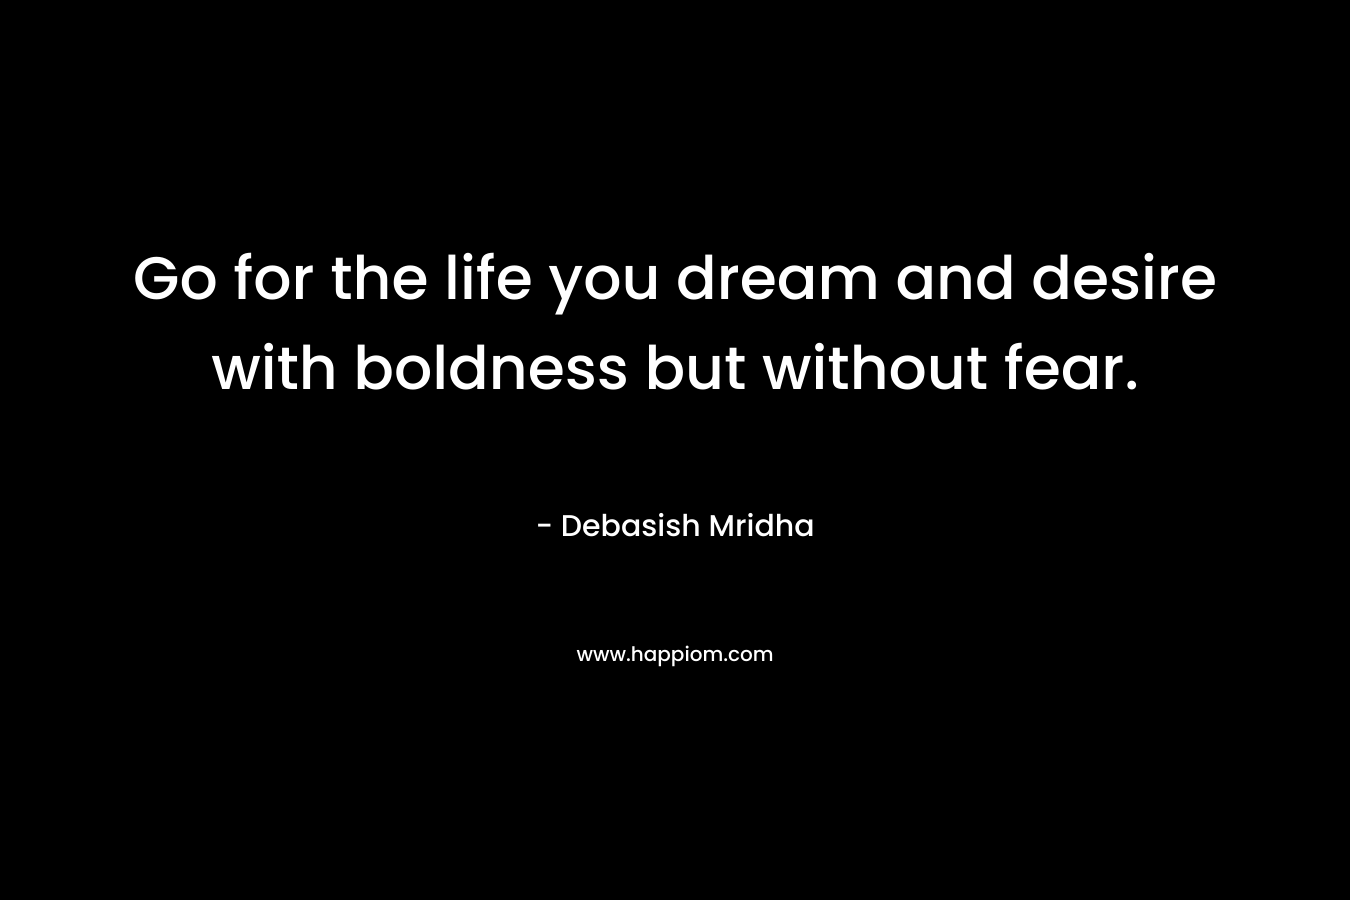 Go for the life you dream and desire with boldness but without fear.